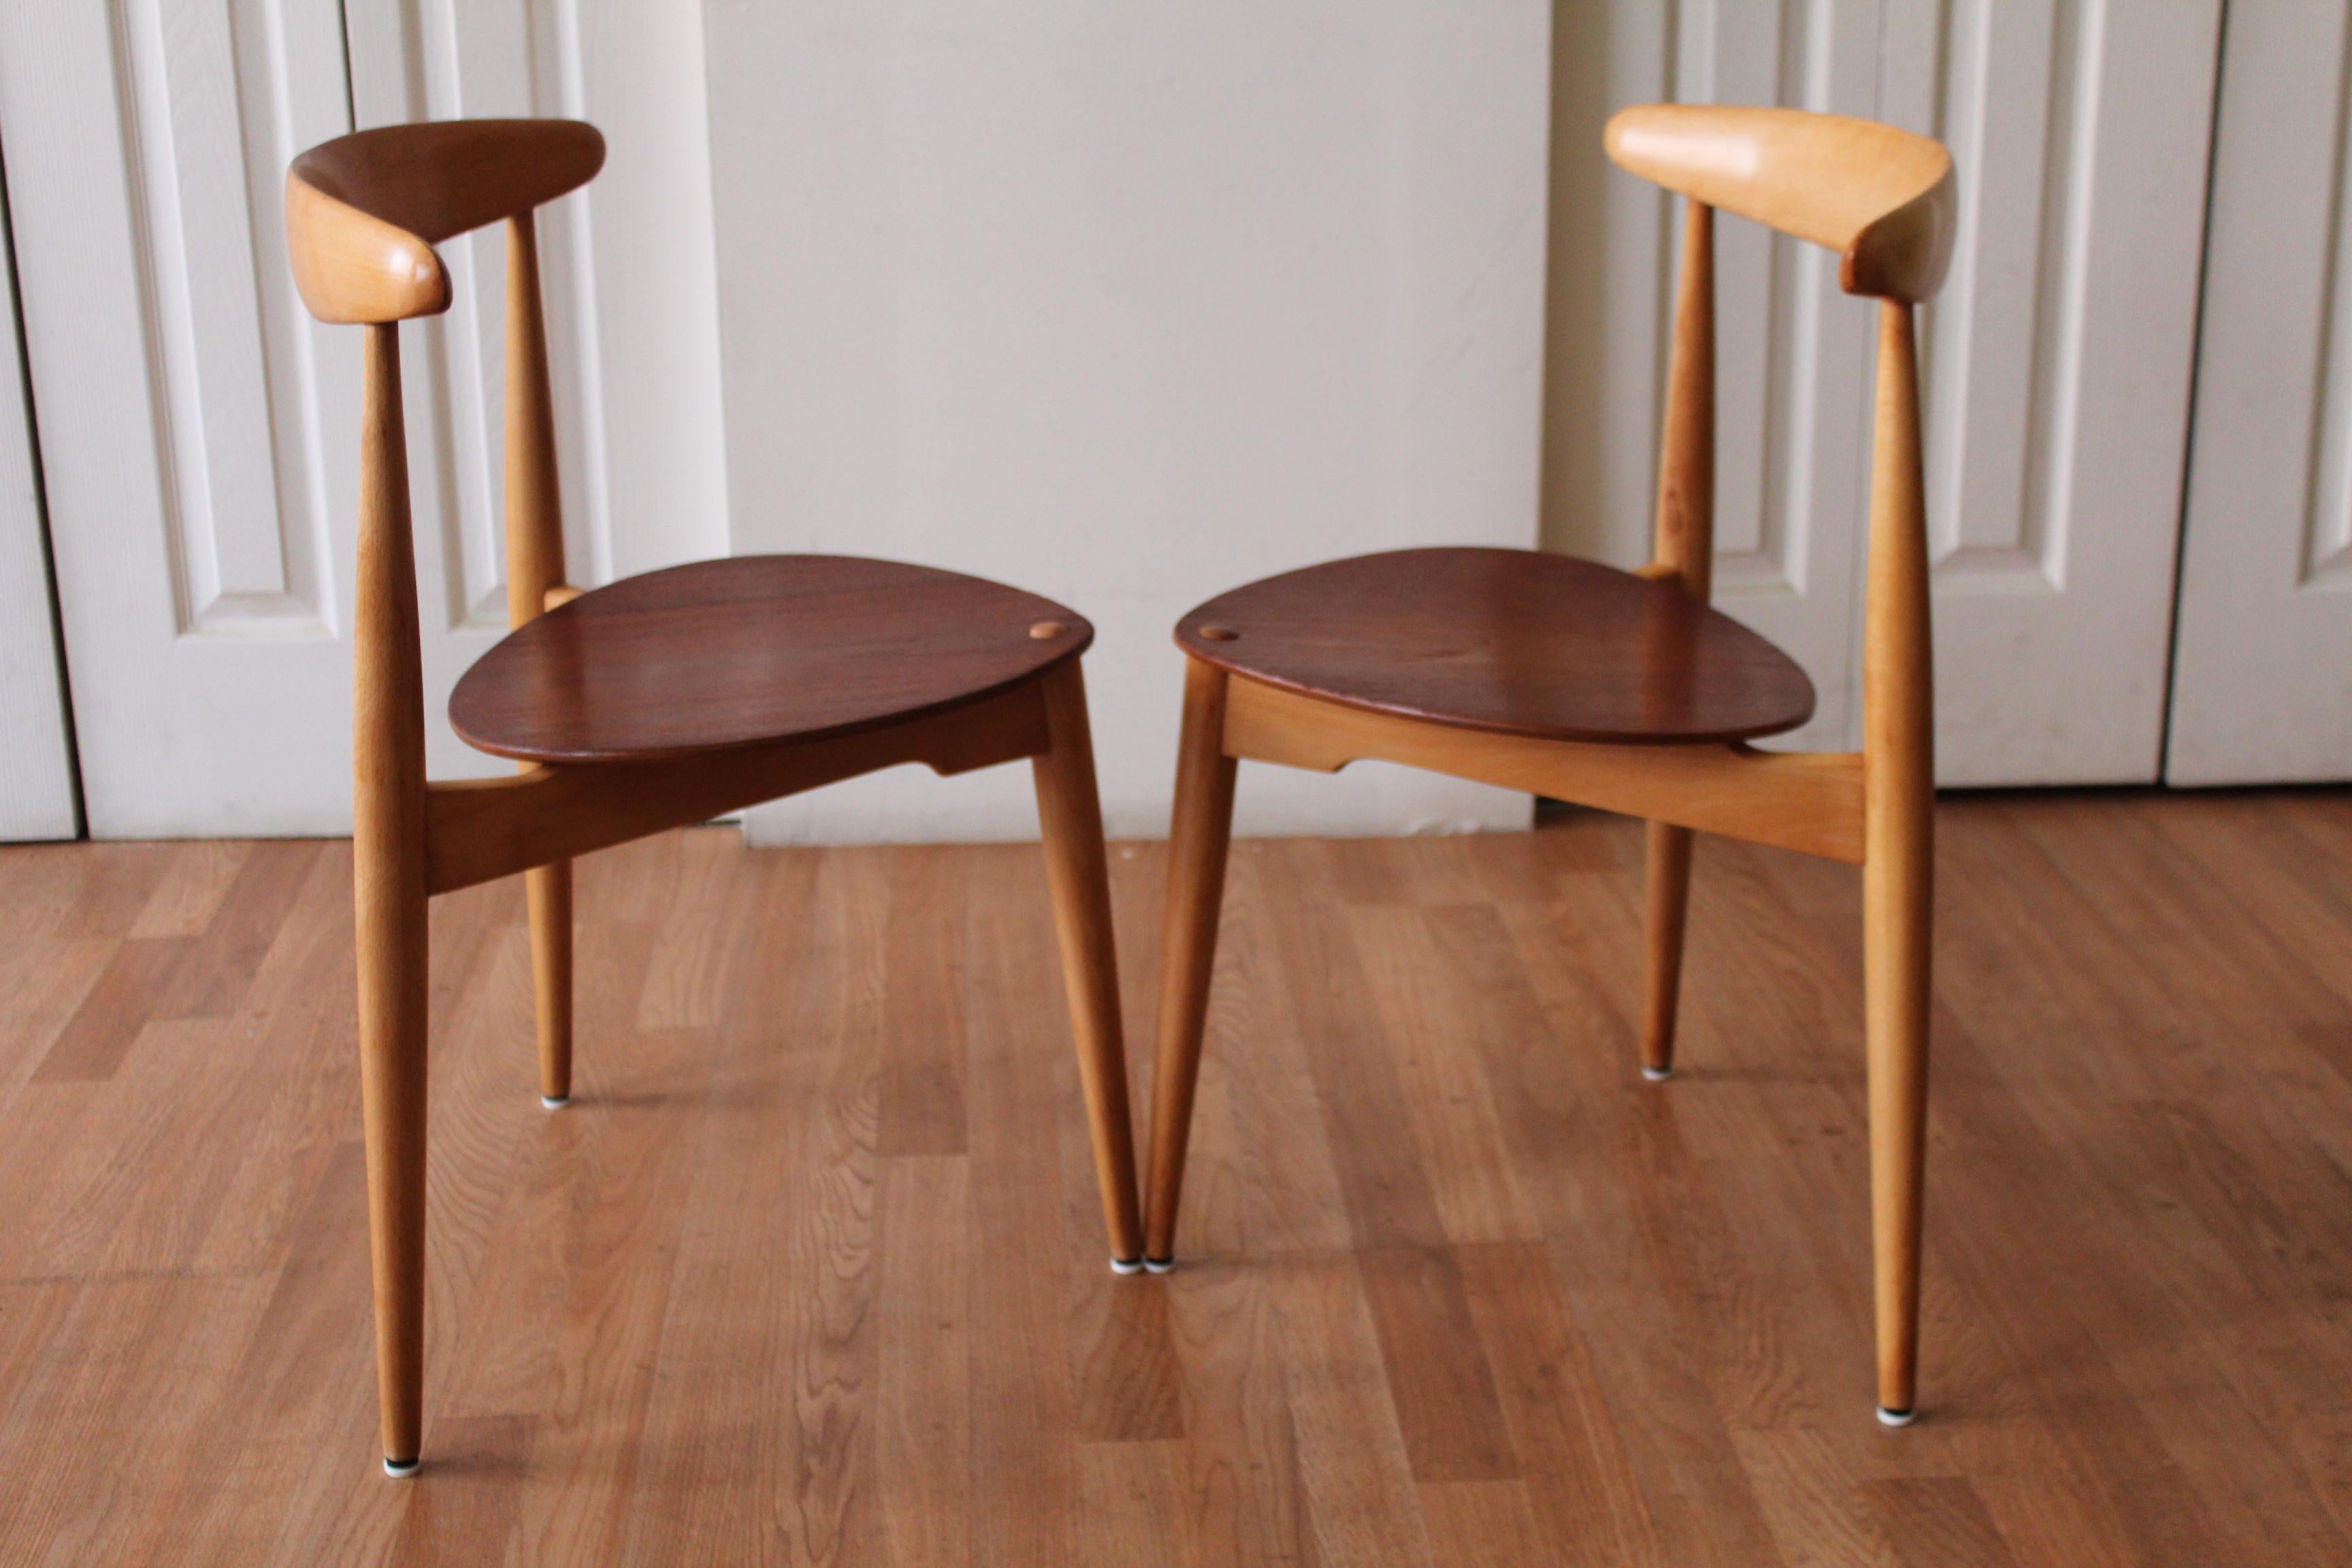 Purist alert! This pair of Danish modern stacking dining chairs is made of teak and beech. The seat is teak and the frame is beech. Freshly waxed, just for you. The 